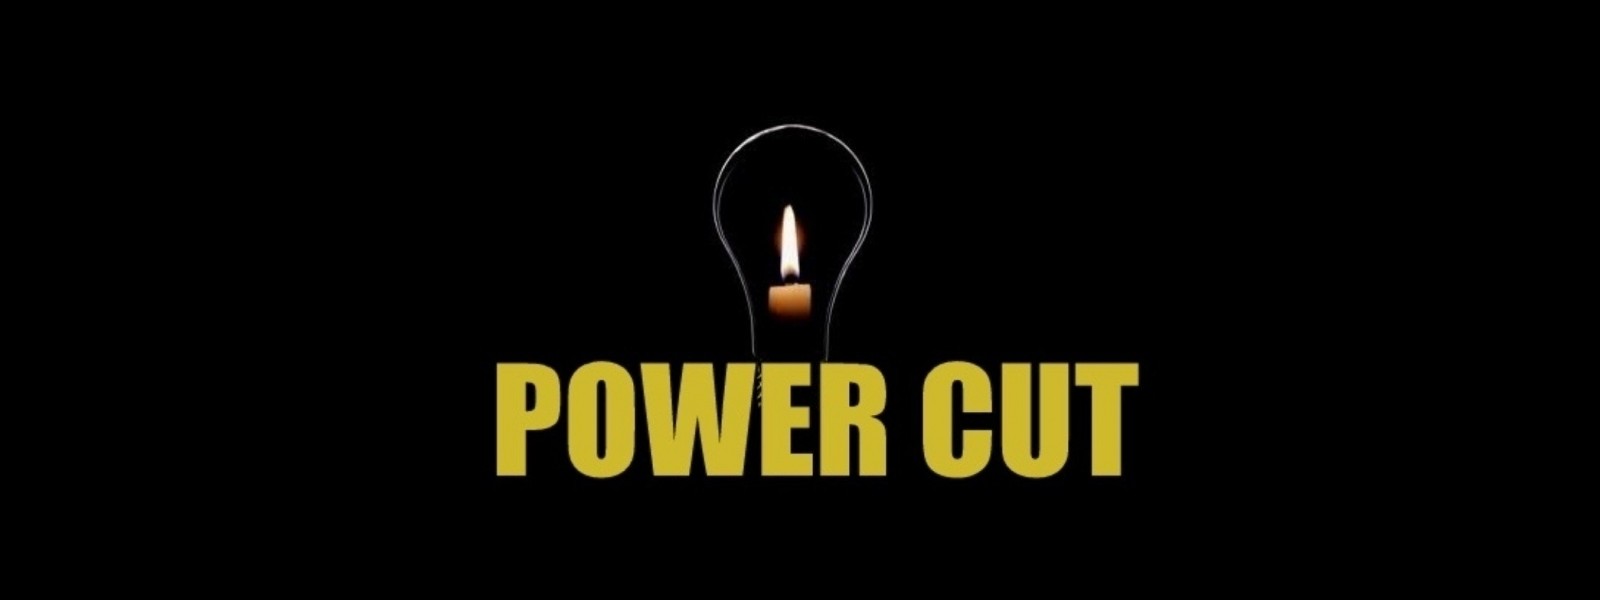 1-hour power cuts approved for 08th to 10th August